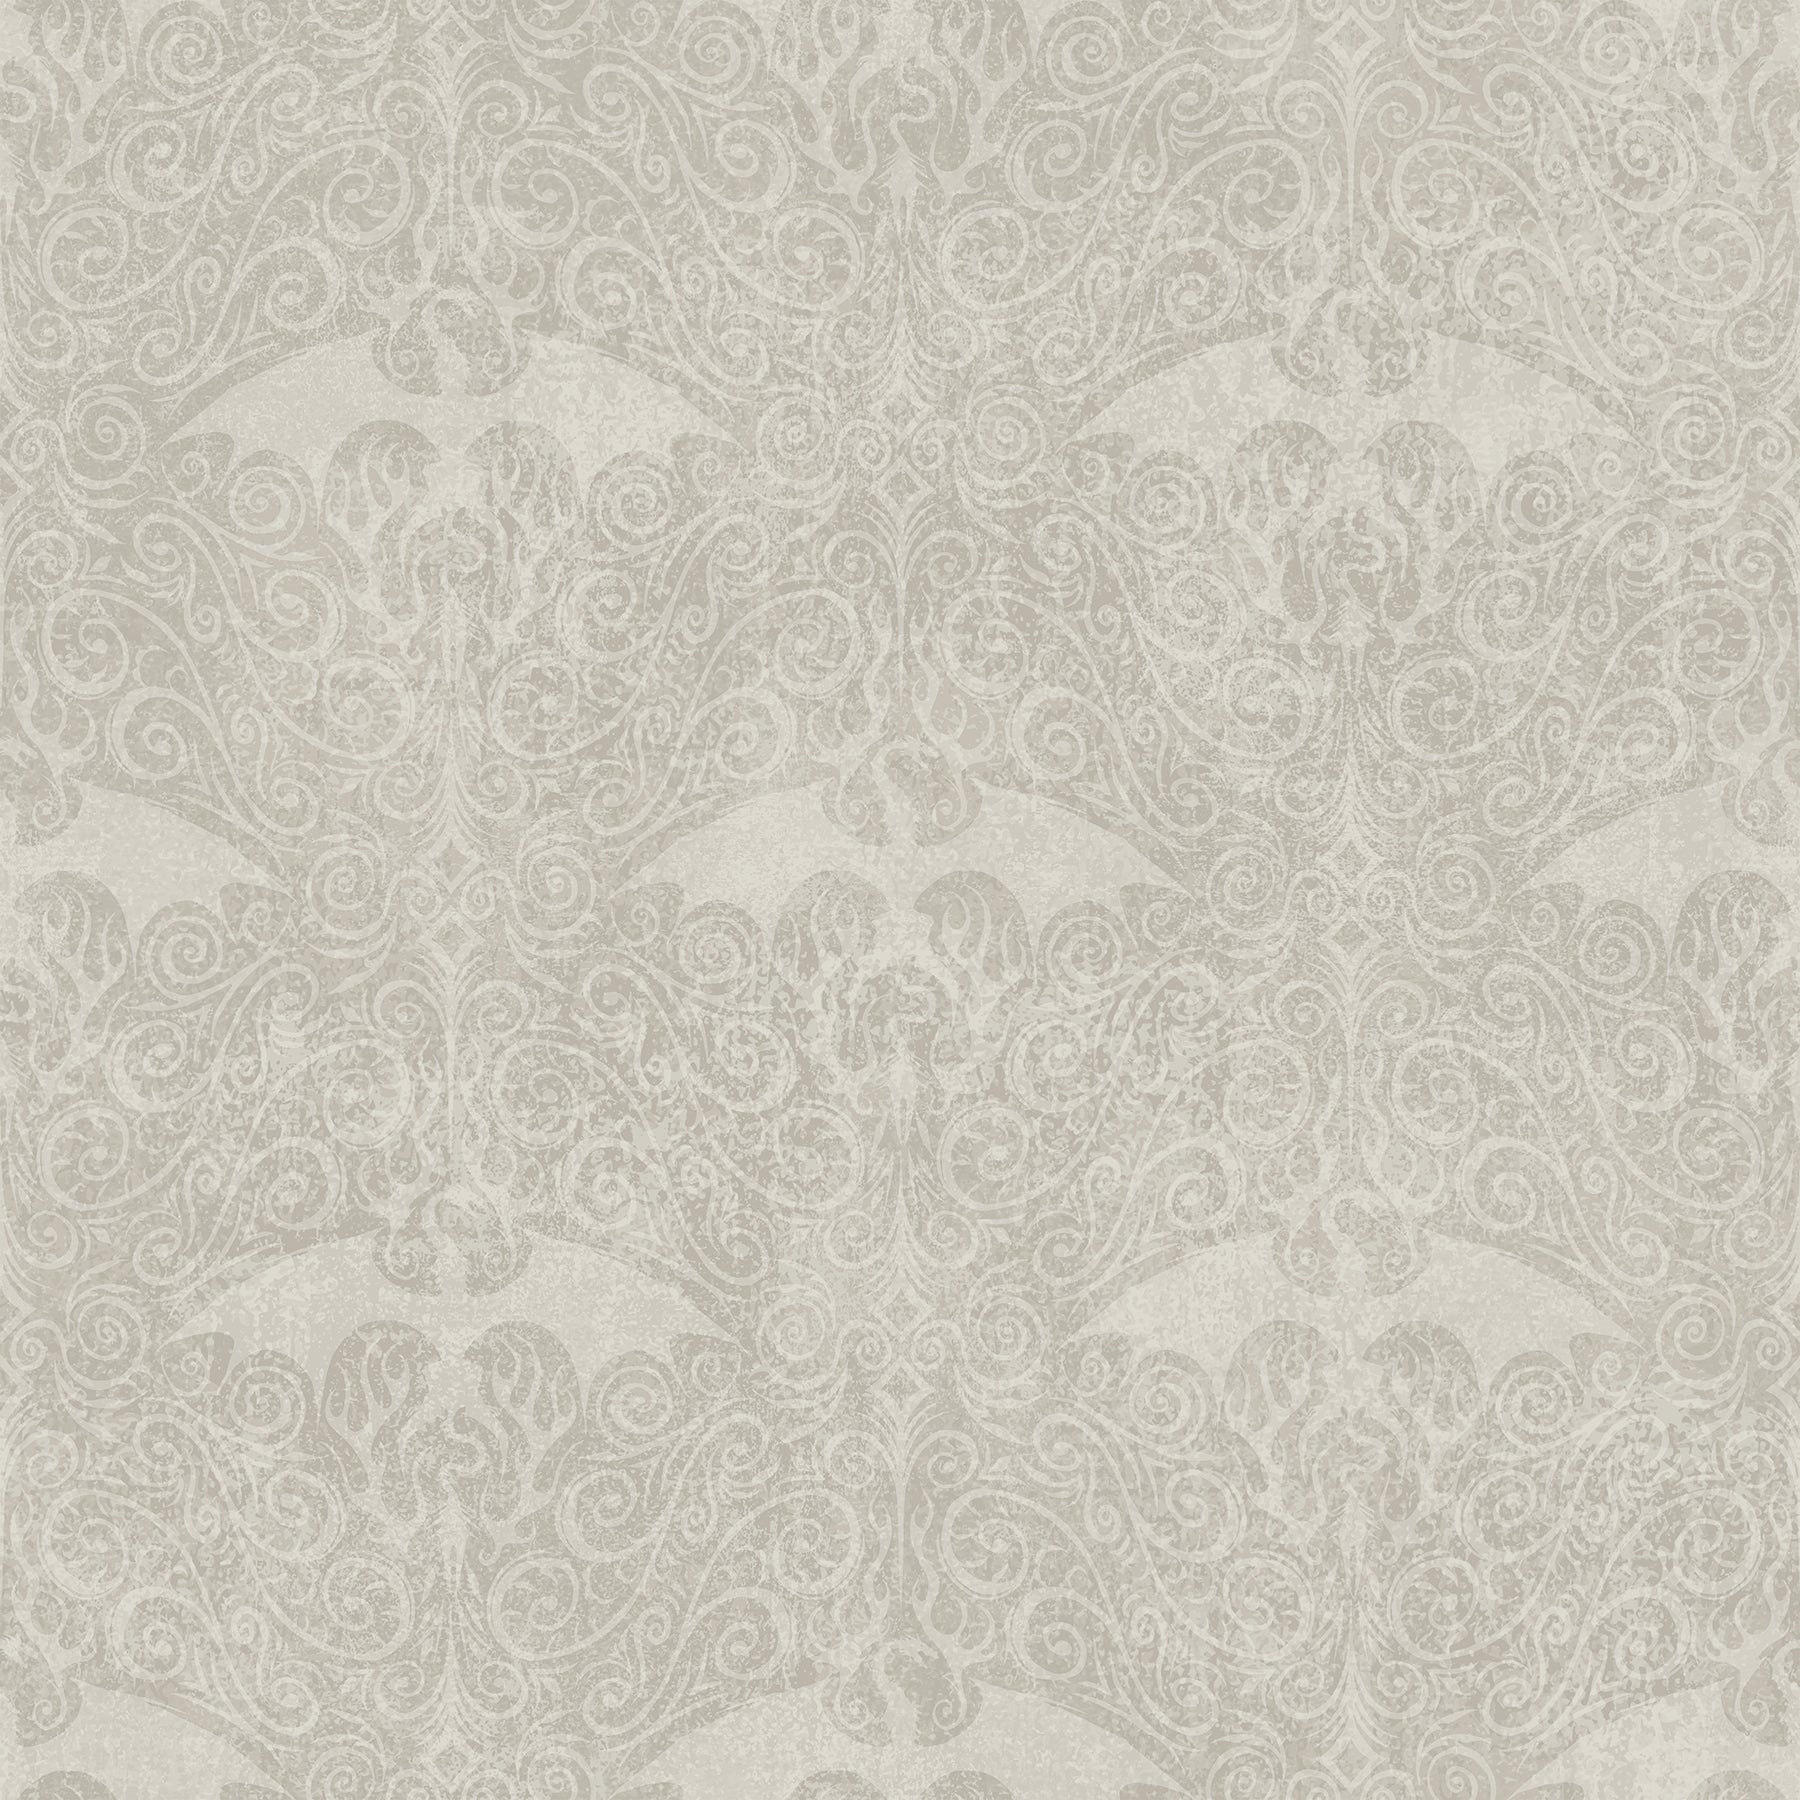 House Of The Dragon Peel and Stick Wallpaper Peel and Stick Wallpaper RoomMates Roll Cream 